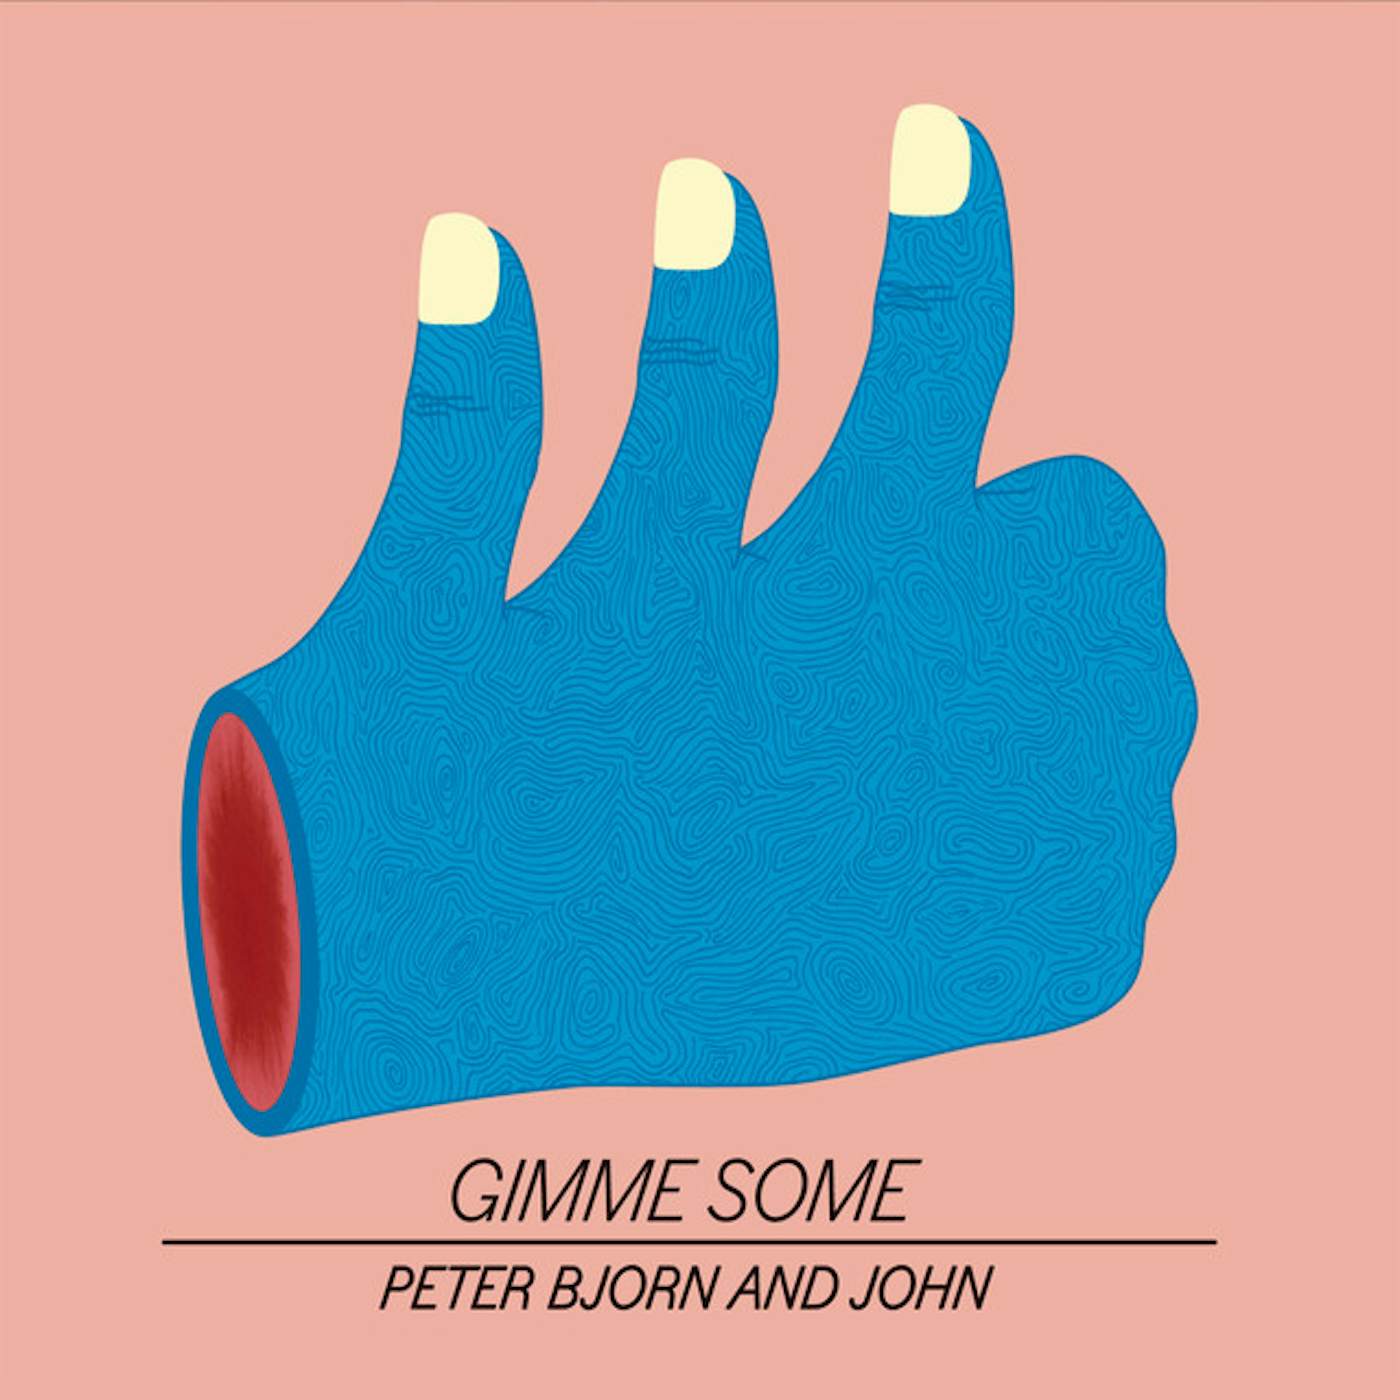 Peter Bjorn and John Gimme Some Vinyl Record